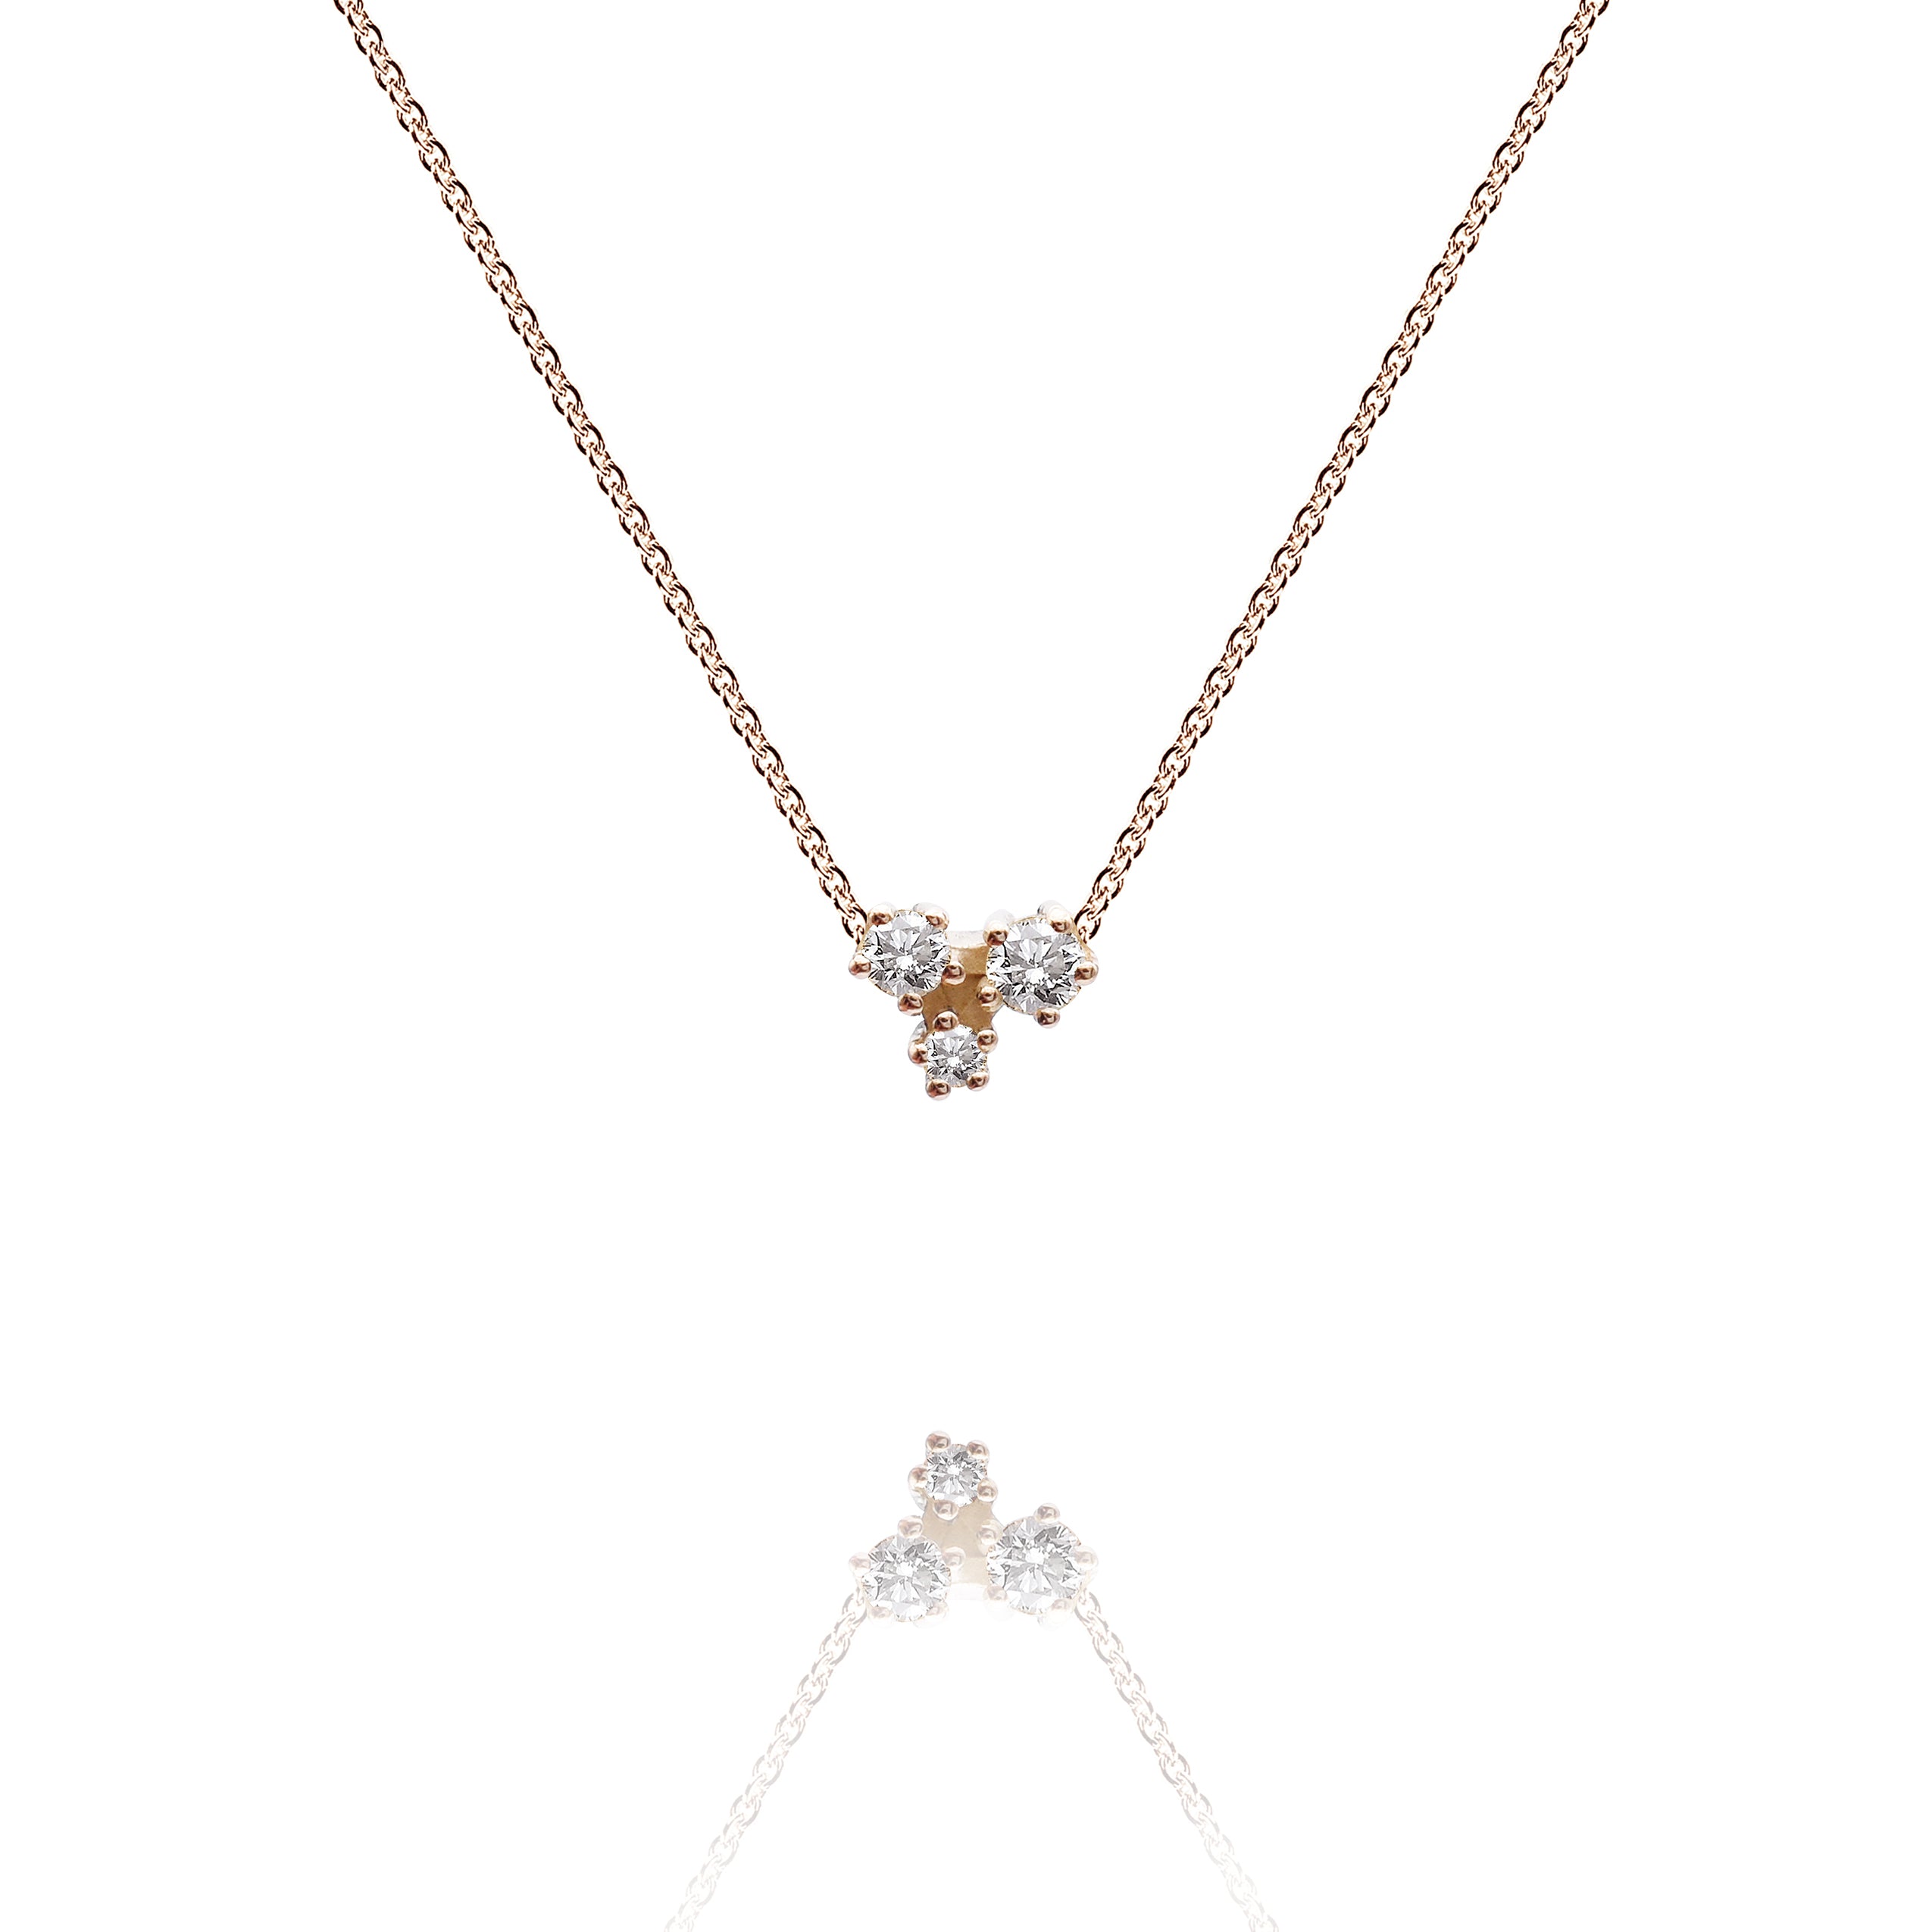 Sparkle pendant "smal" in 585 gold with diamonds